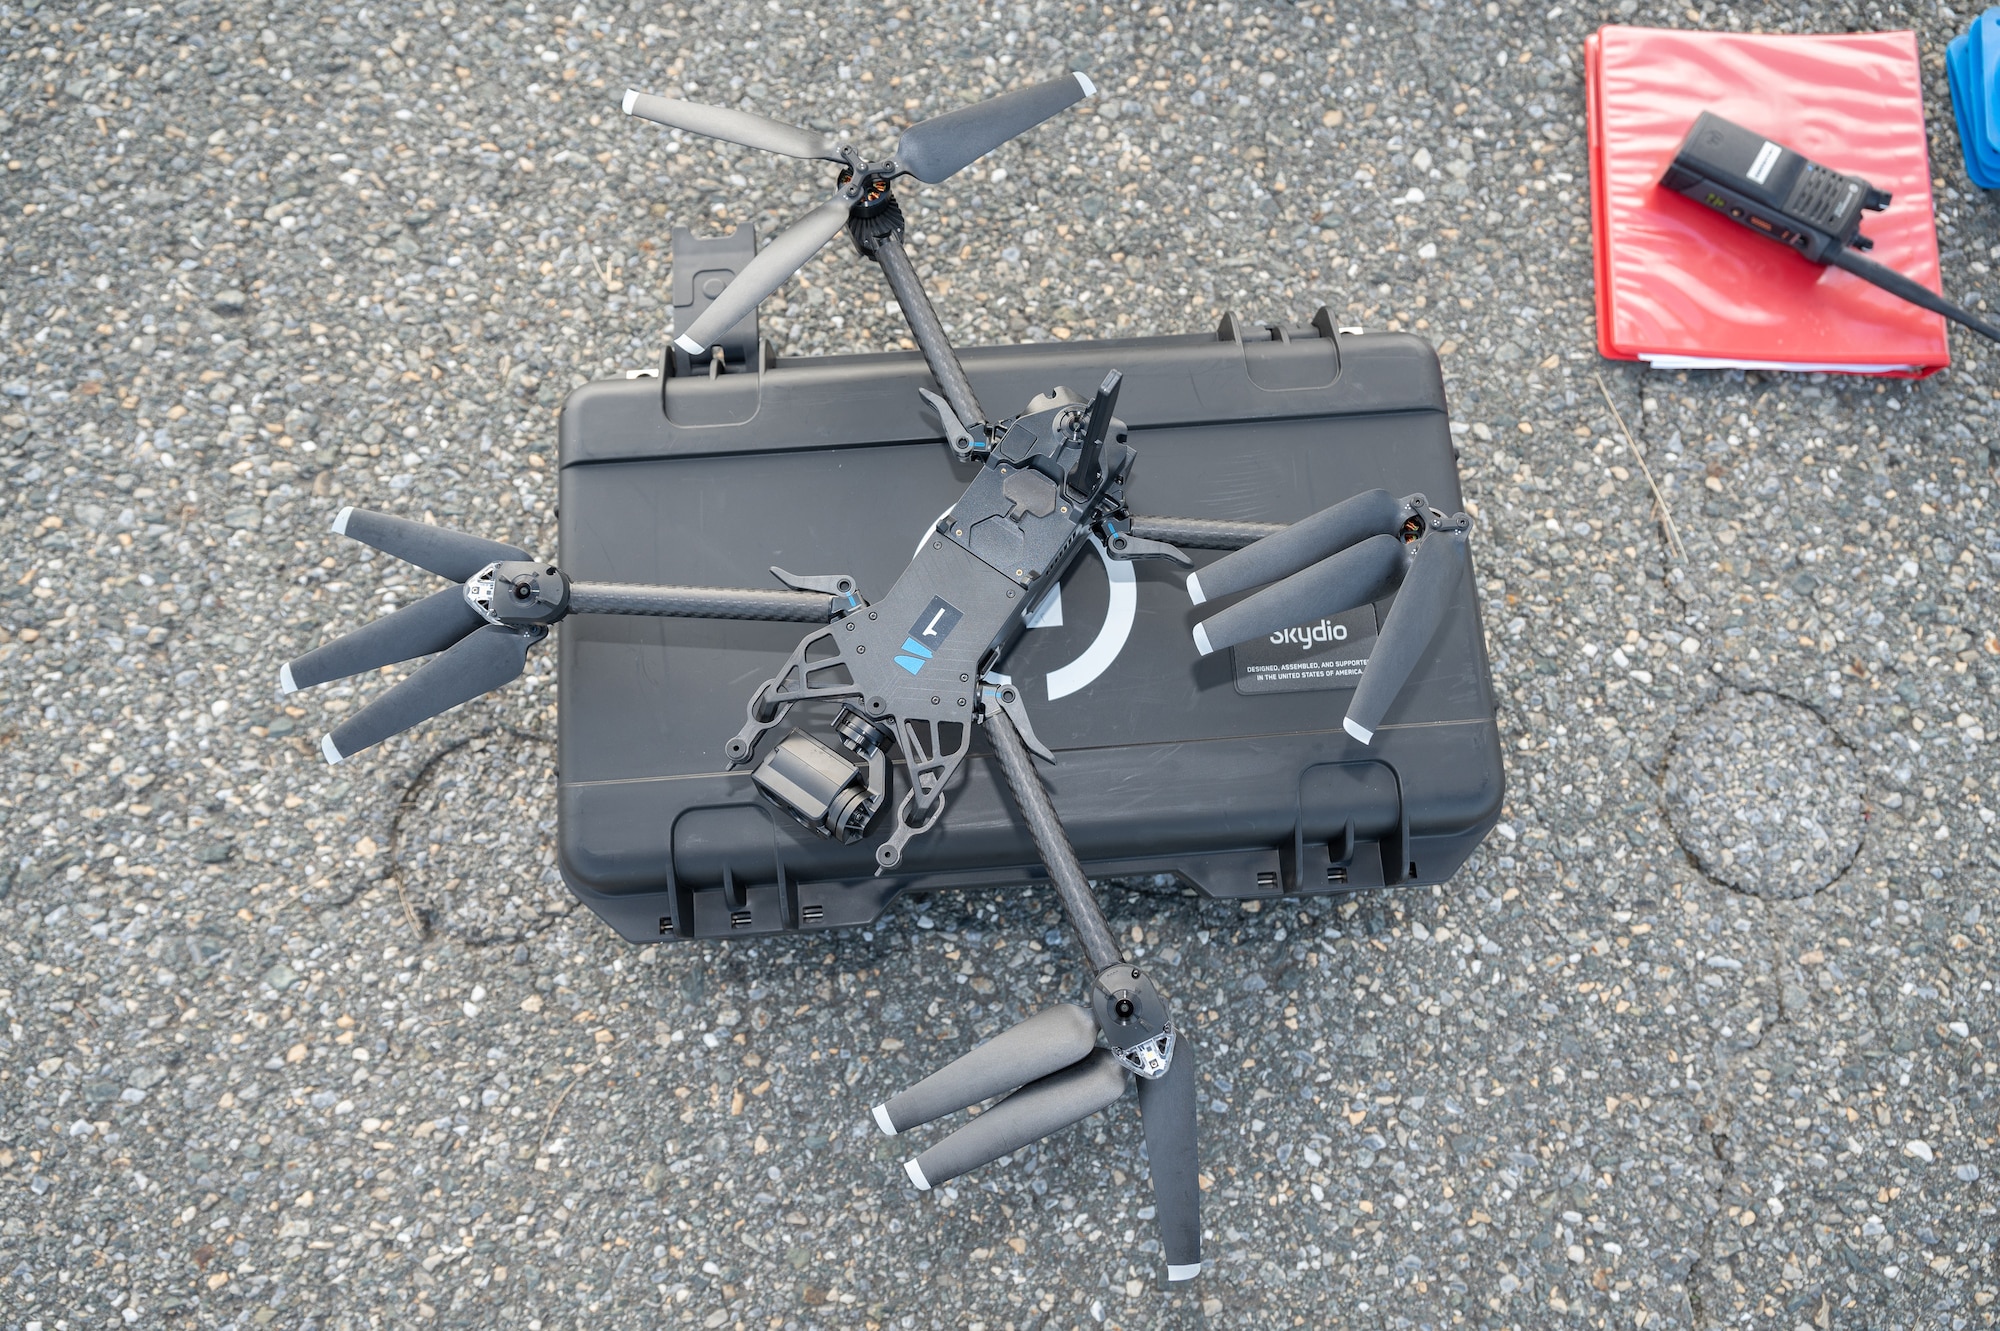 A Skydio X2D drone belonging to the 436th Mission Generation Group at Dover Air Force Base, Delaware, Nov. 4, 2022. This specific drone model is available only to the Department of Defense. (U.S. Air Force photo by Mauricio Campino)